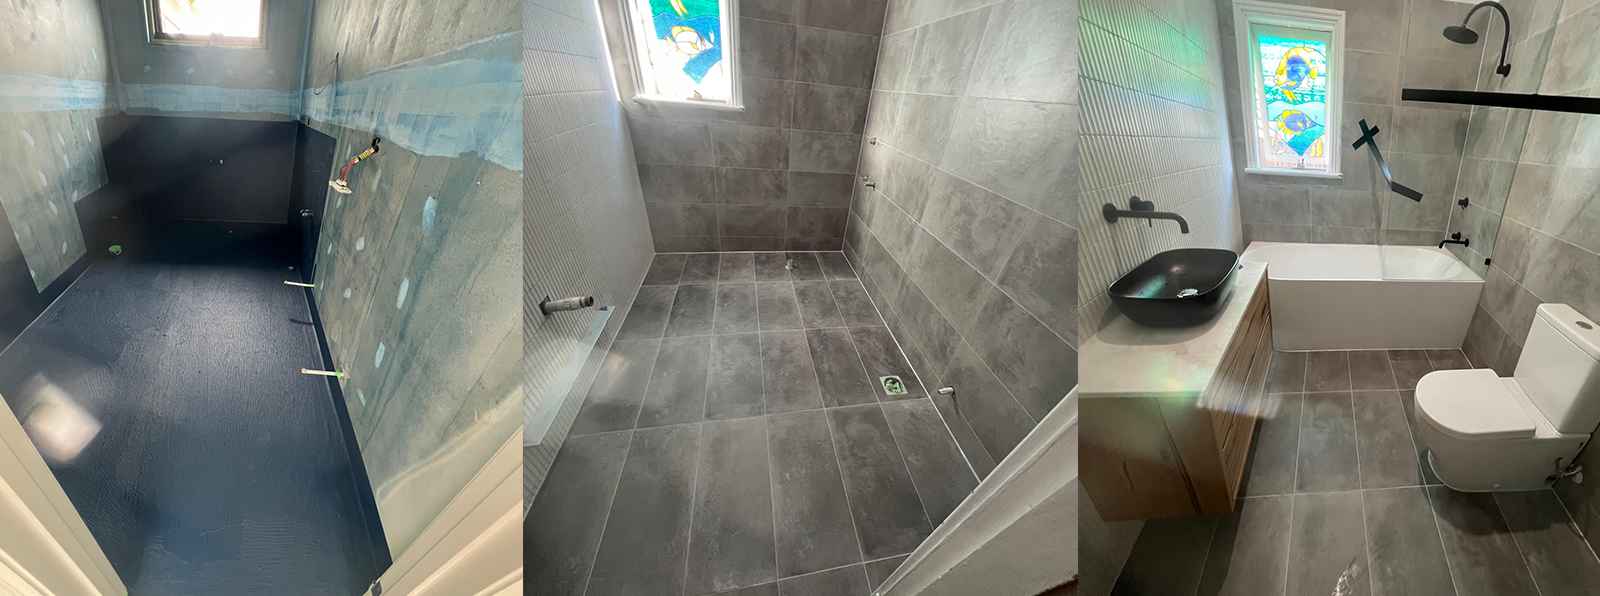 Tiling and waterproofing Melbourne